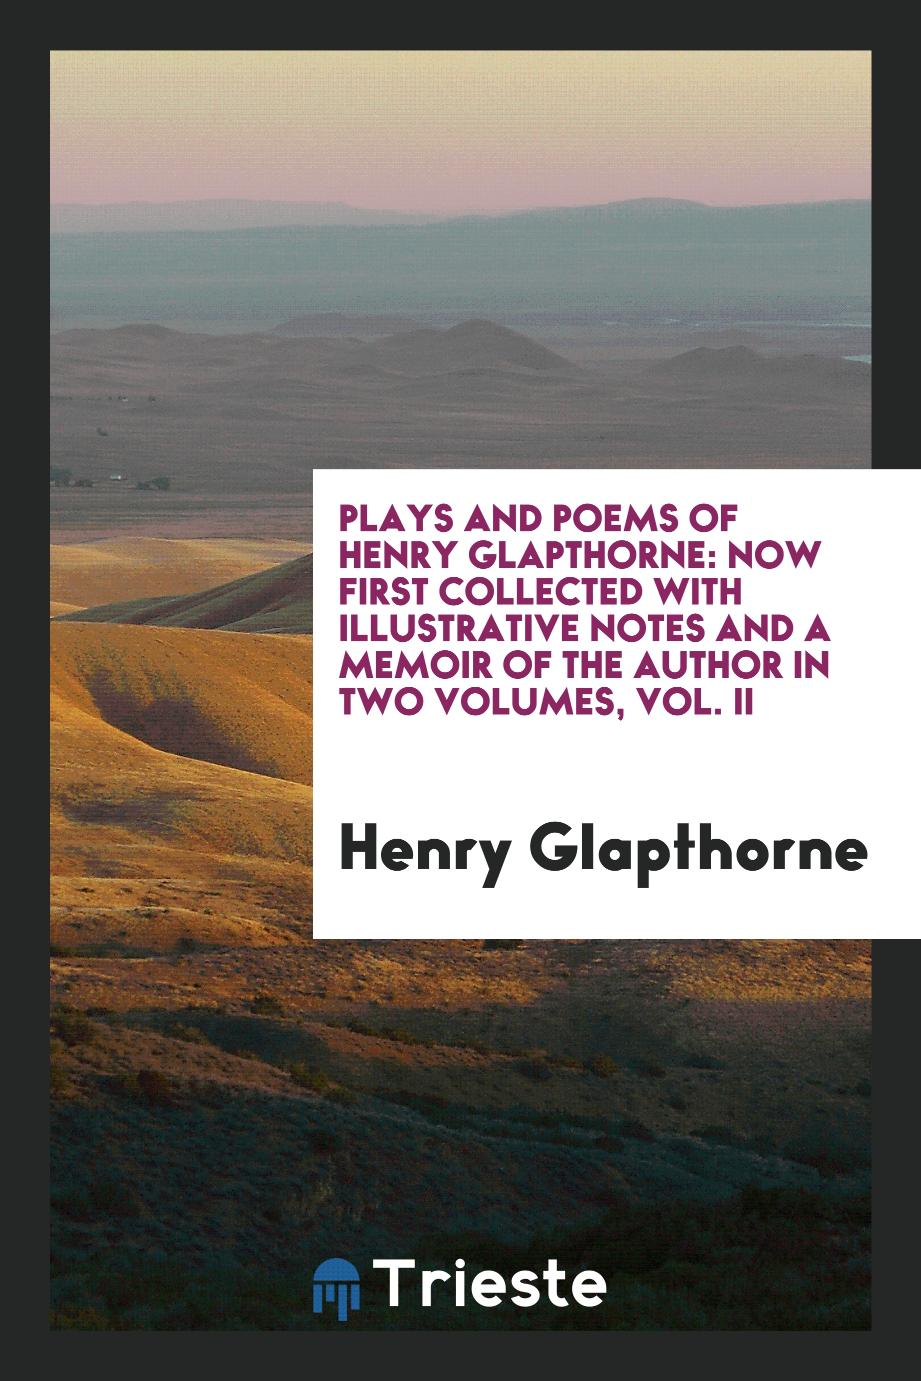 Plays and poems of Henry Glapthorne: now first collected with illustrative notes and a memoir of the author in two volumes, Vol. II